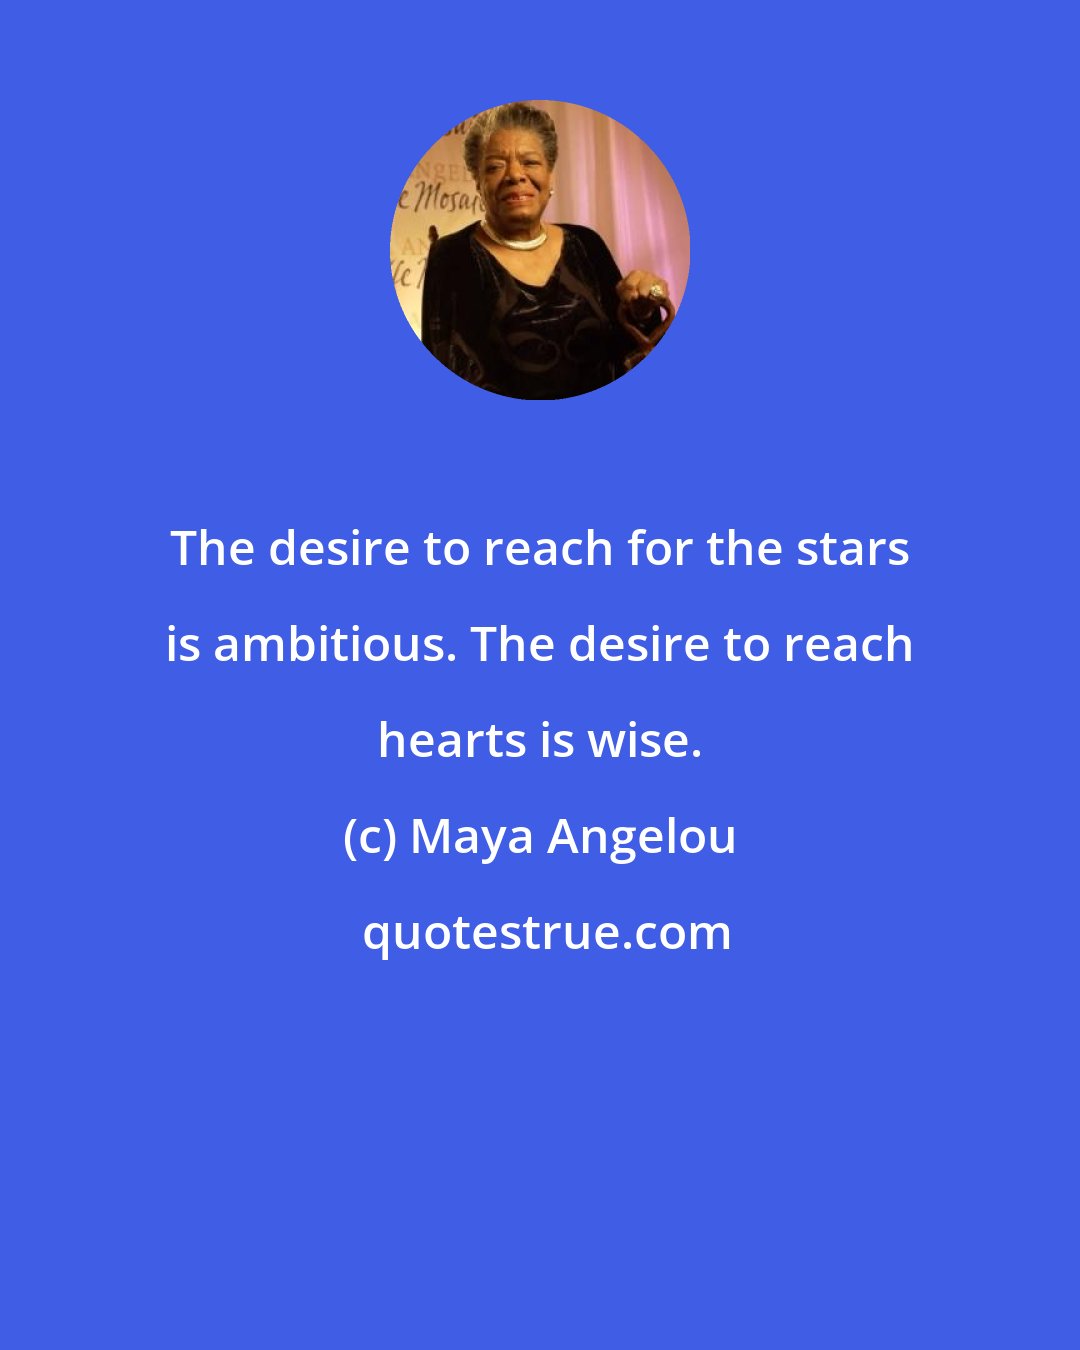 Maya Angelou: The desire to reach for the stars is ambitious. The desire to reach hearts is wise.